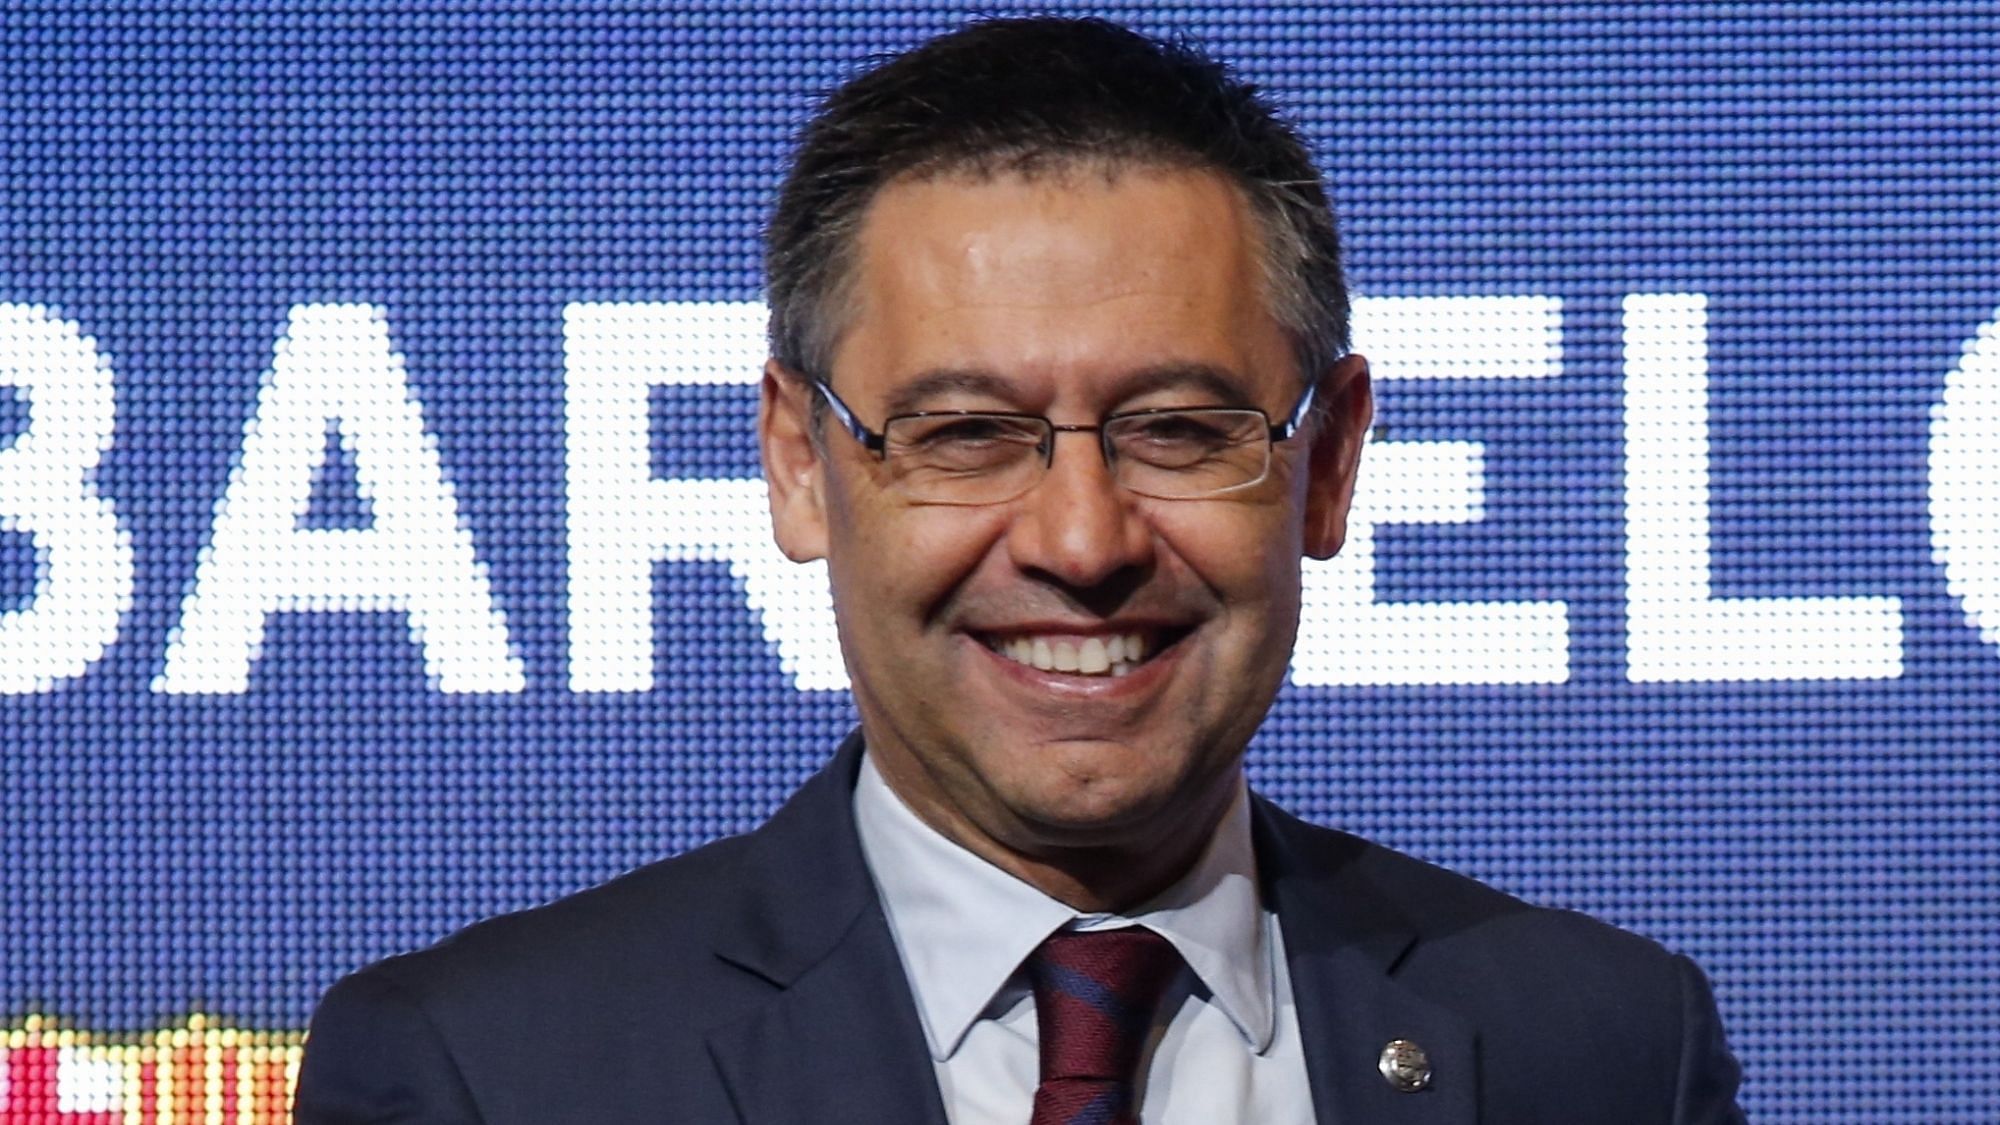 Barcelona President Josep Maria Bartomeu is most likely to face a vote of no confidence from members of the club.